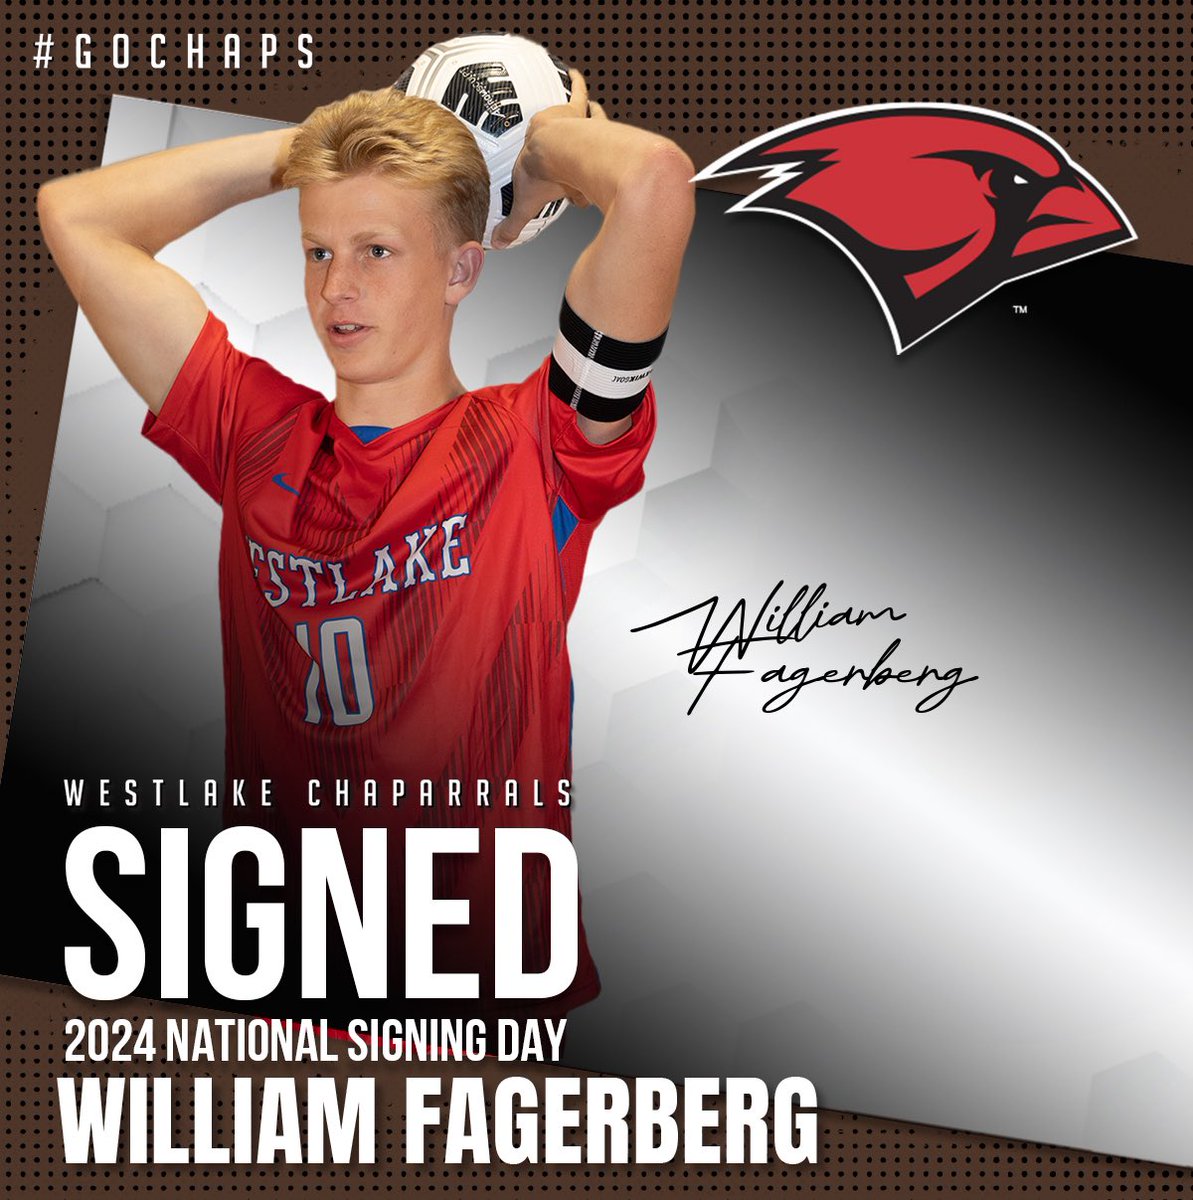 William Fagerberg will continue his education and soccer career at the University of Incarnate Word. Congratulations, William. #GoChaps #TheWord